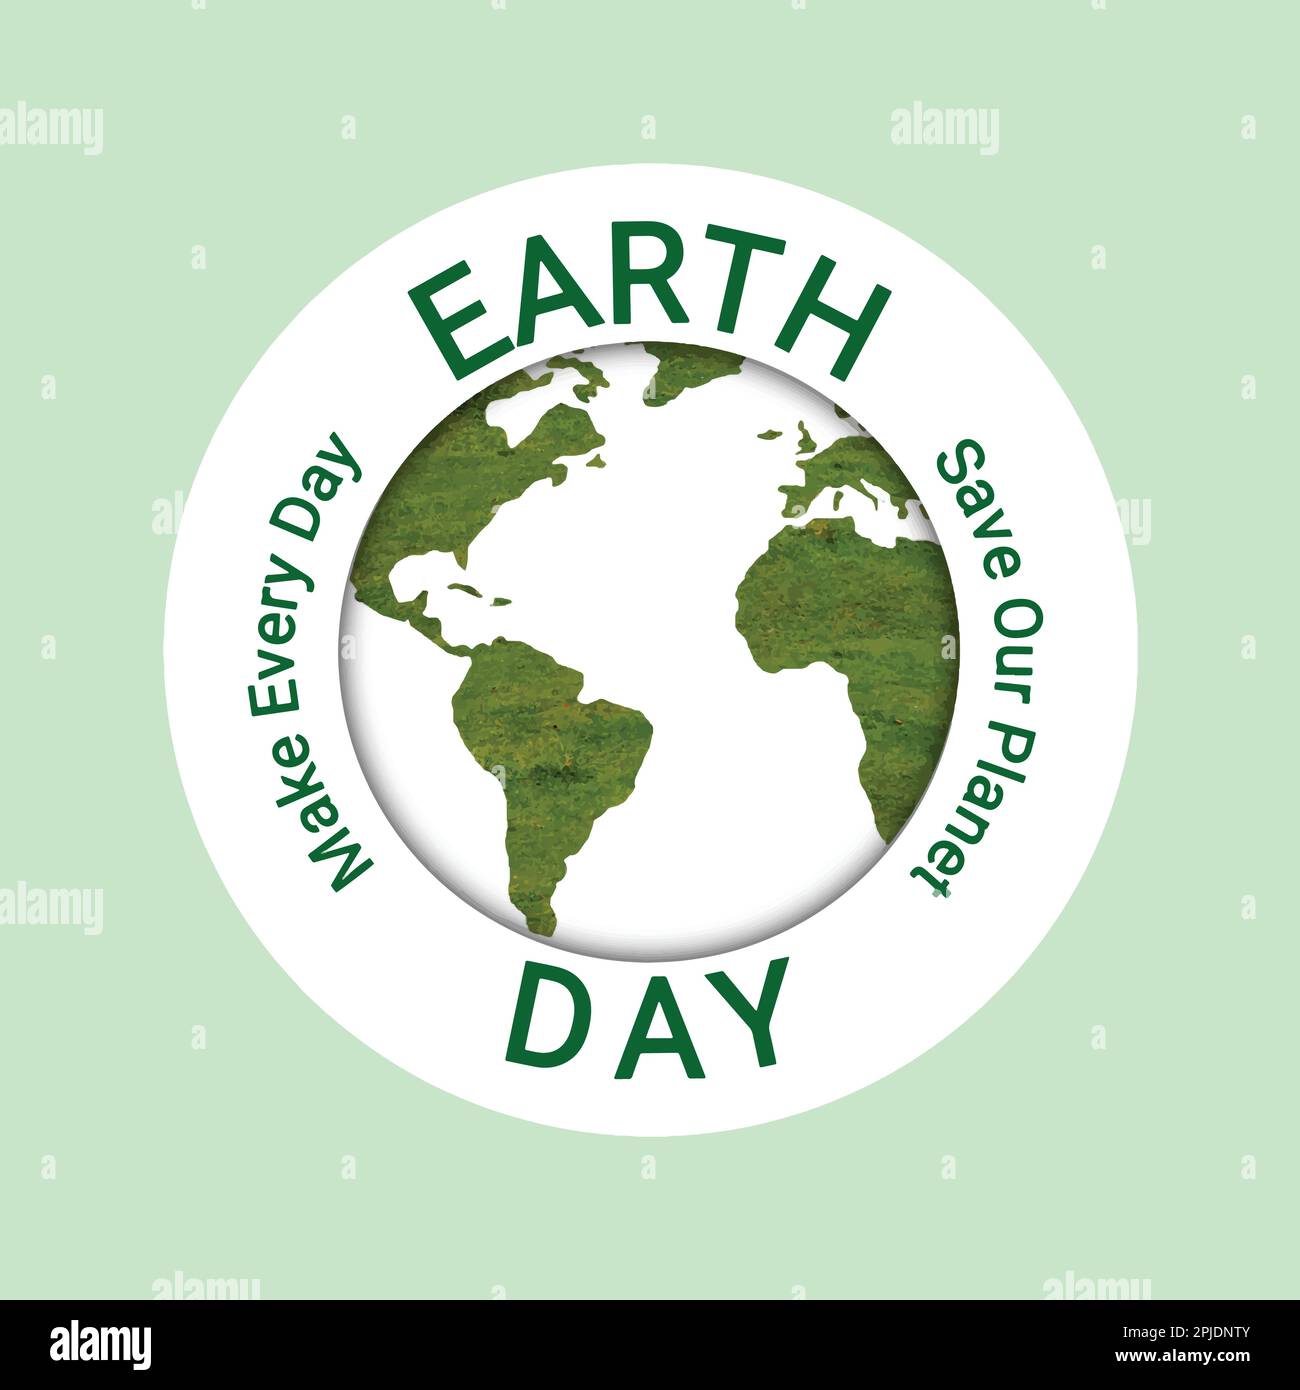 Earth Day Vector Illustration. Earth Day Poster or Banner Design. Stock Vector